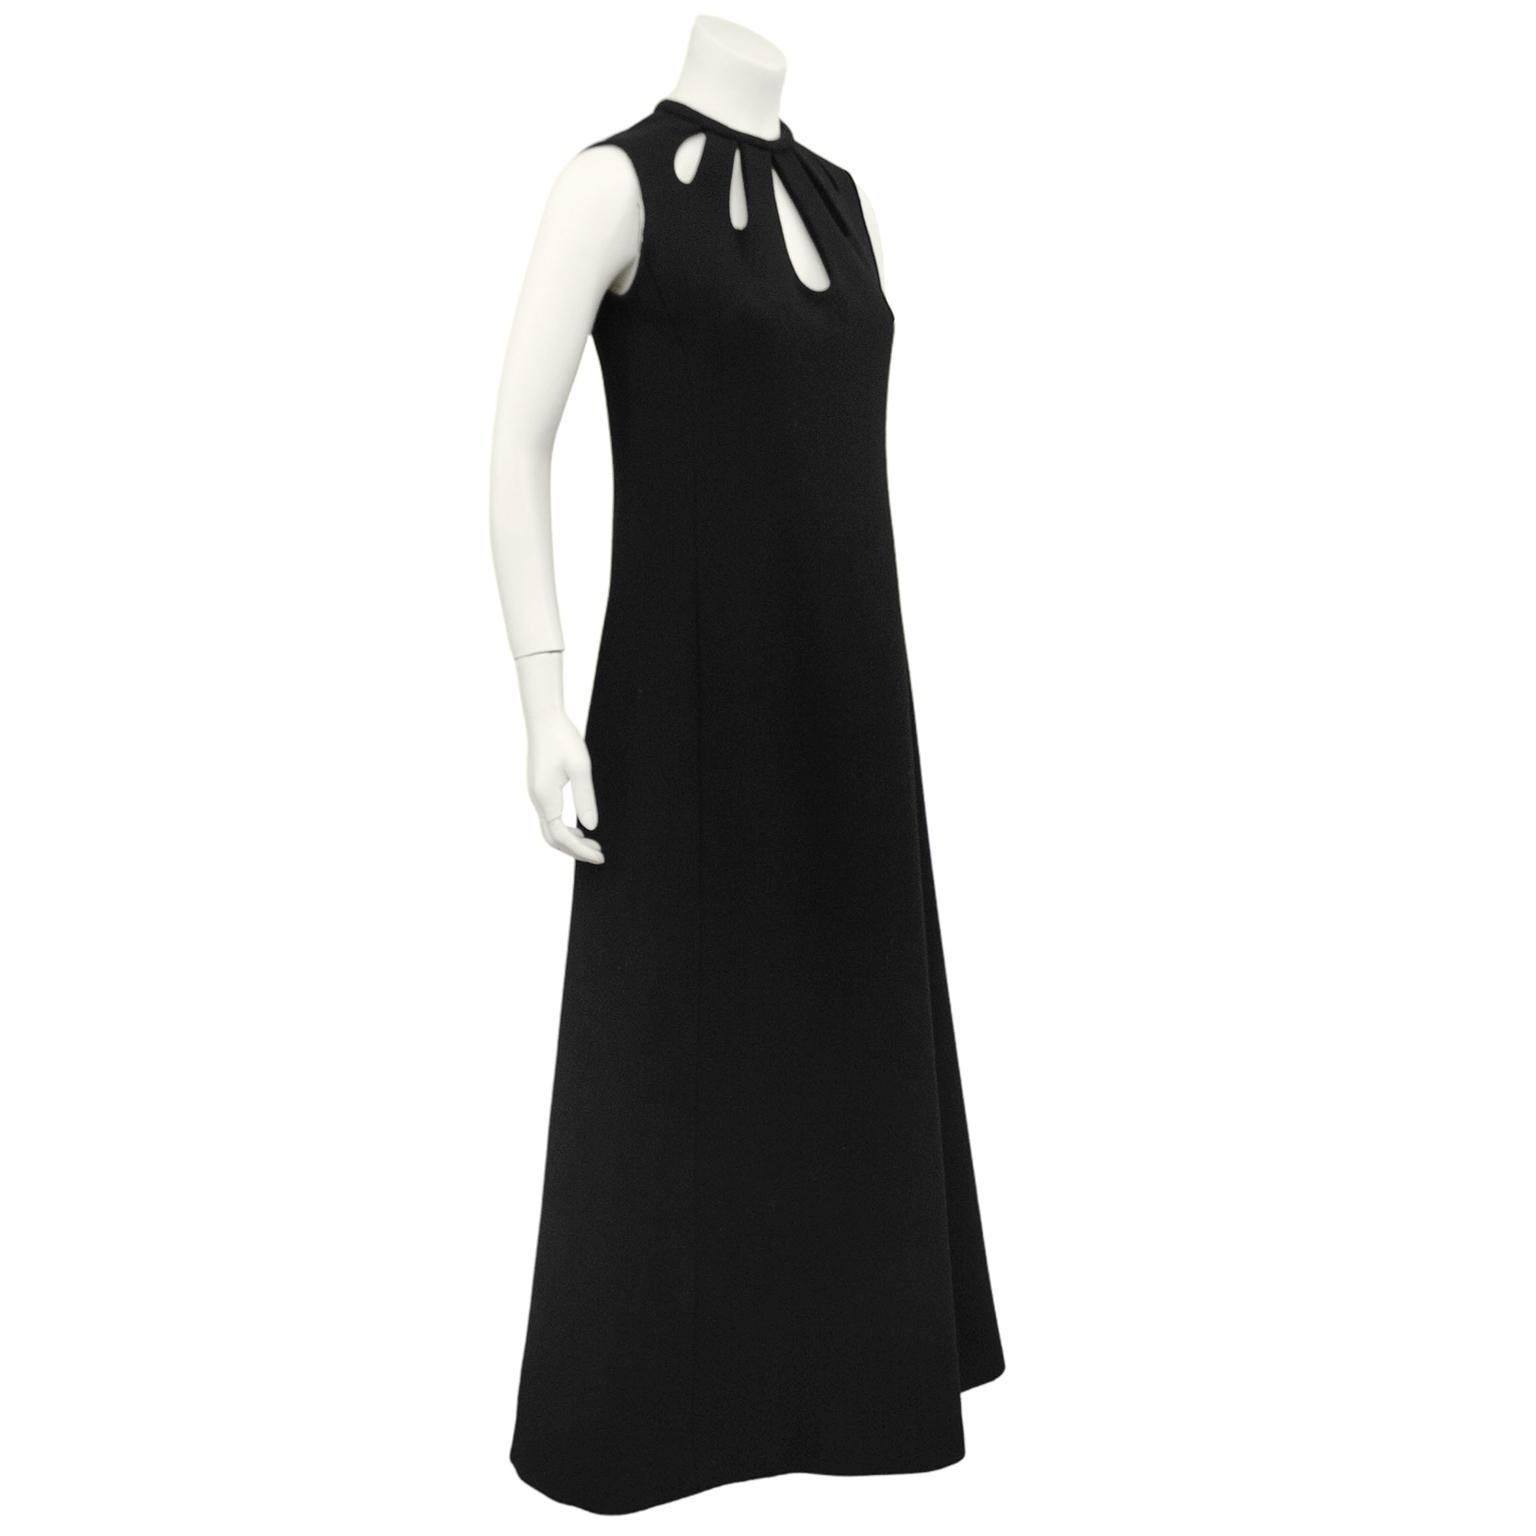 Stunning and graphic black wool Scherrer gown from the early 1970s. Sleeveless with tube piped collar and cascading teardrop shaped cutouts on front and back. Gorgeous minimal a line shape hits the floor. Zipper up centre back. Excellent vintage